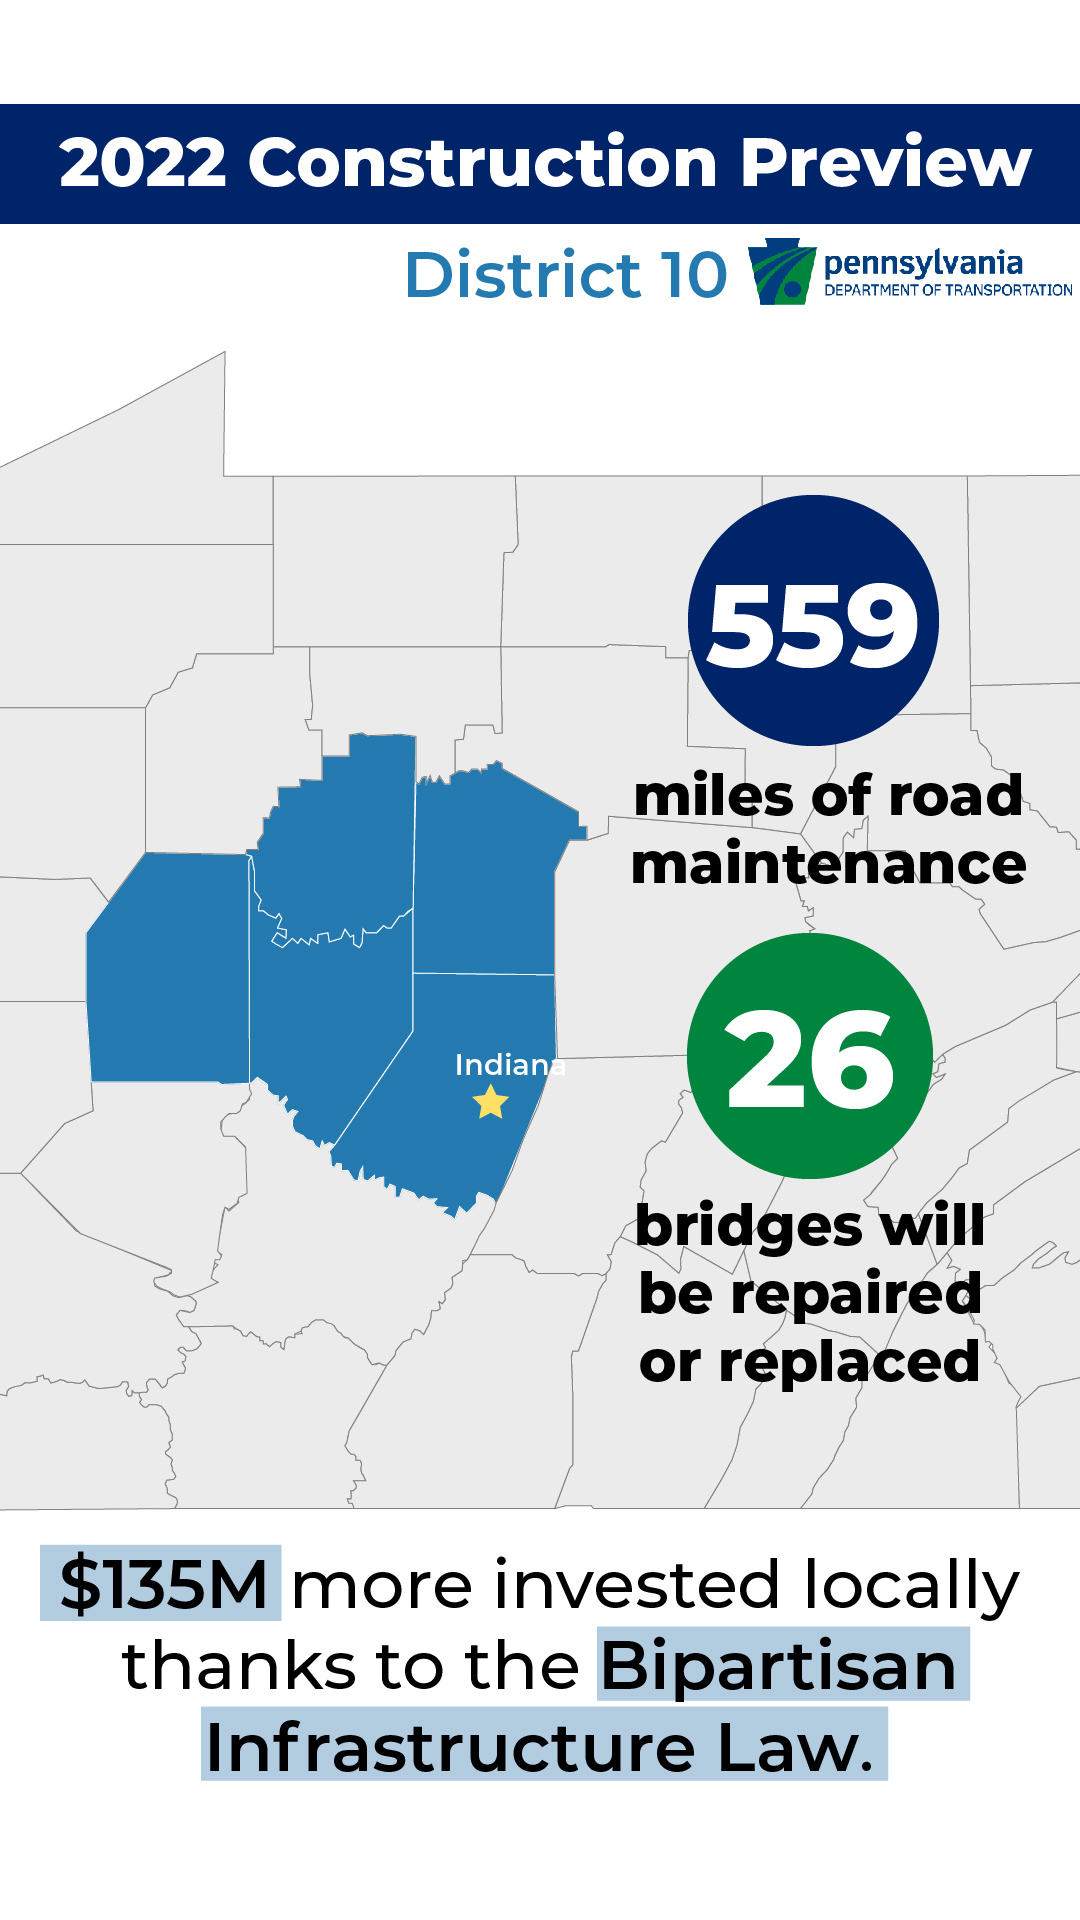 In PennDOT's District 10, we anticipate 559 miles of paving and 26 bridge repairs or replacements in 2022. Thanks to the Bipartisan Infrastructure Law, $135 million more will be invested locally.